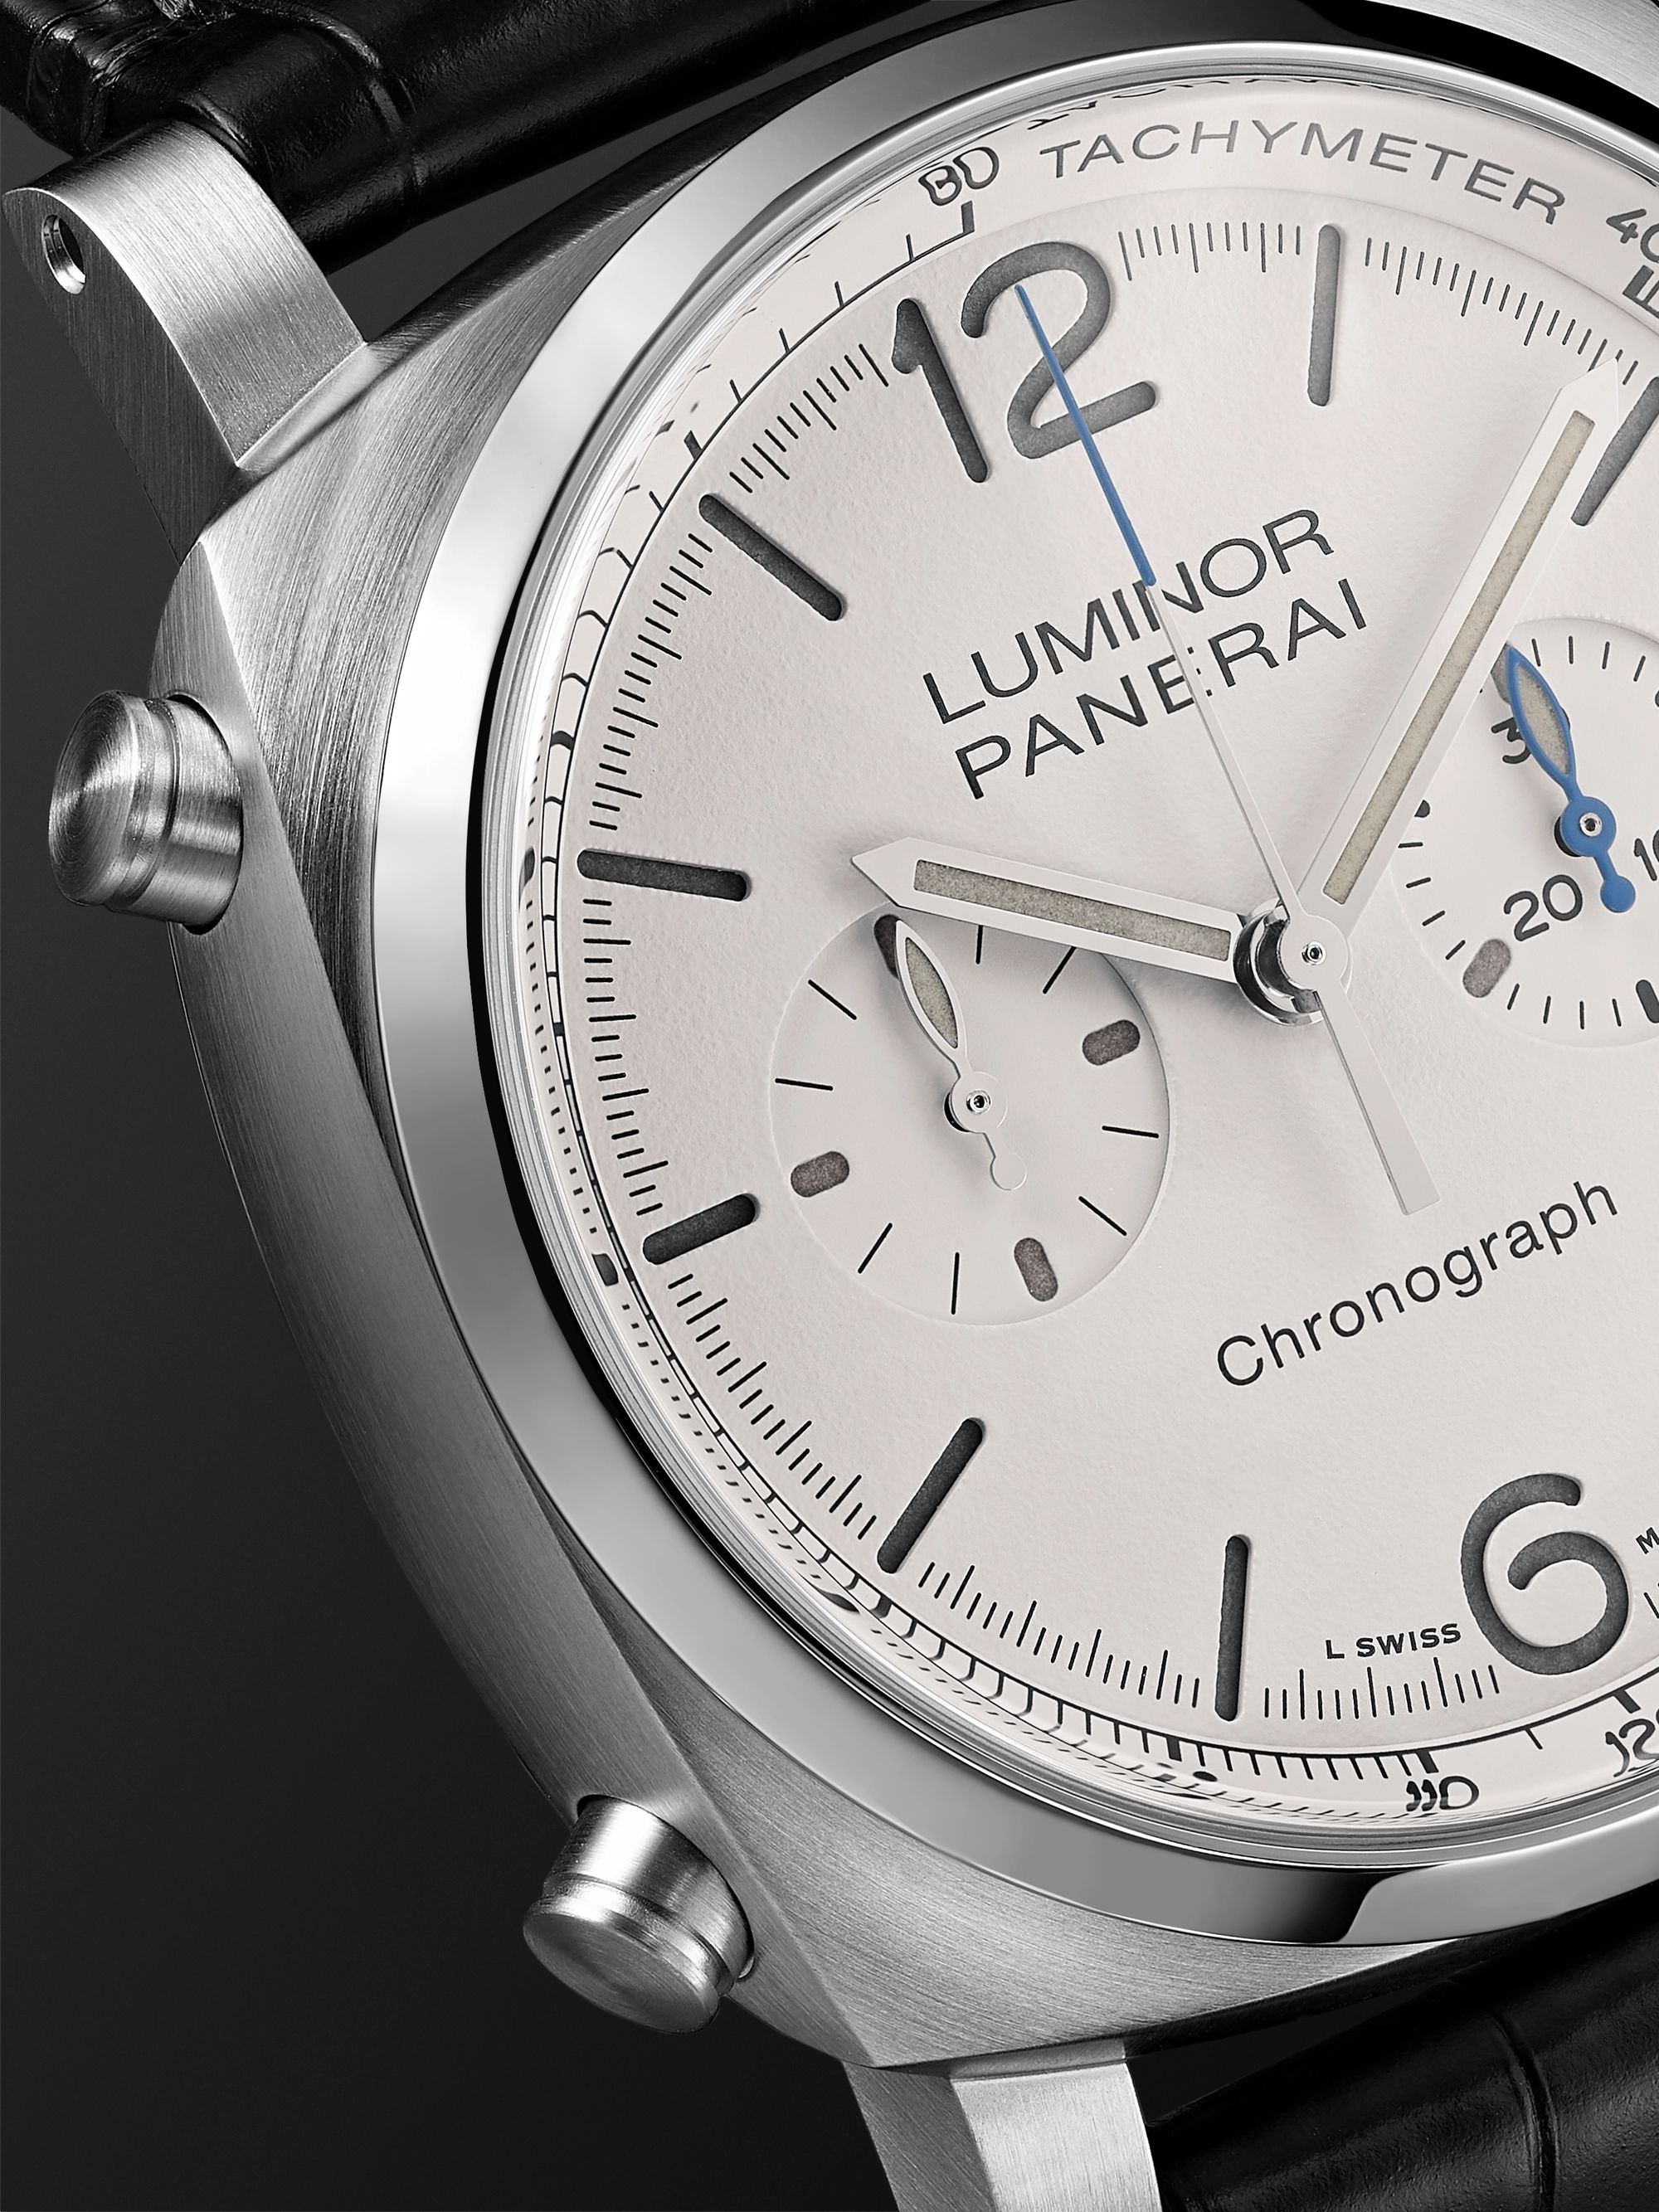 PANERAI Luminor Chrono Automatic Flyback Chronograph 44mm Stainless Steel and Alligator Watch, Ref. No. PAM1218